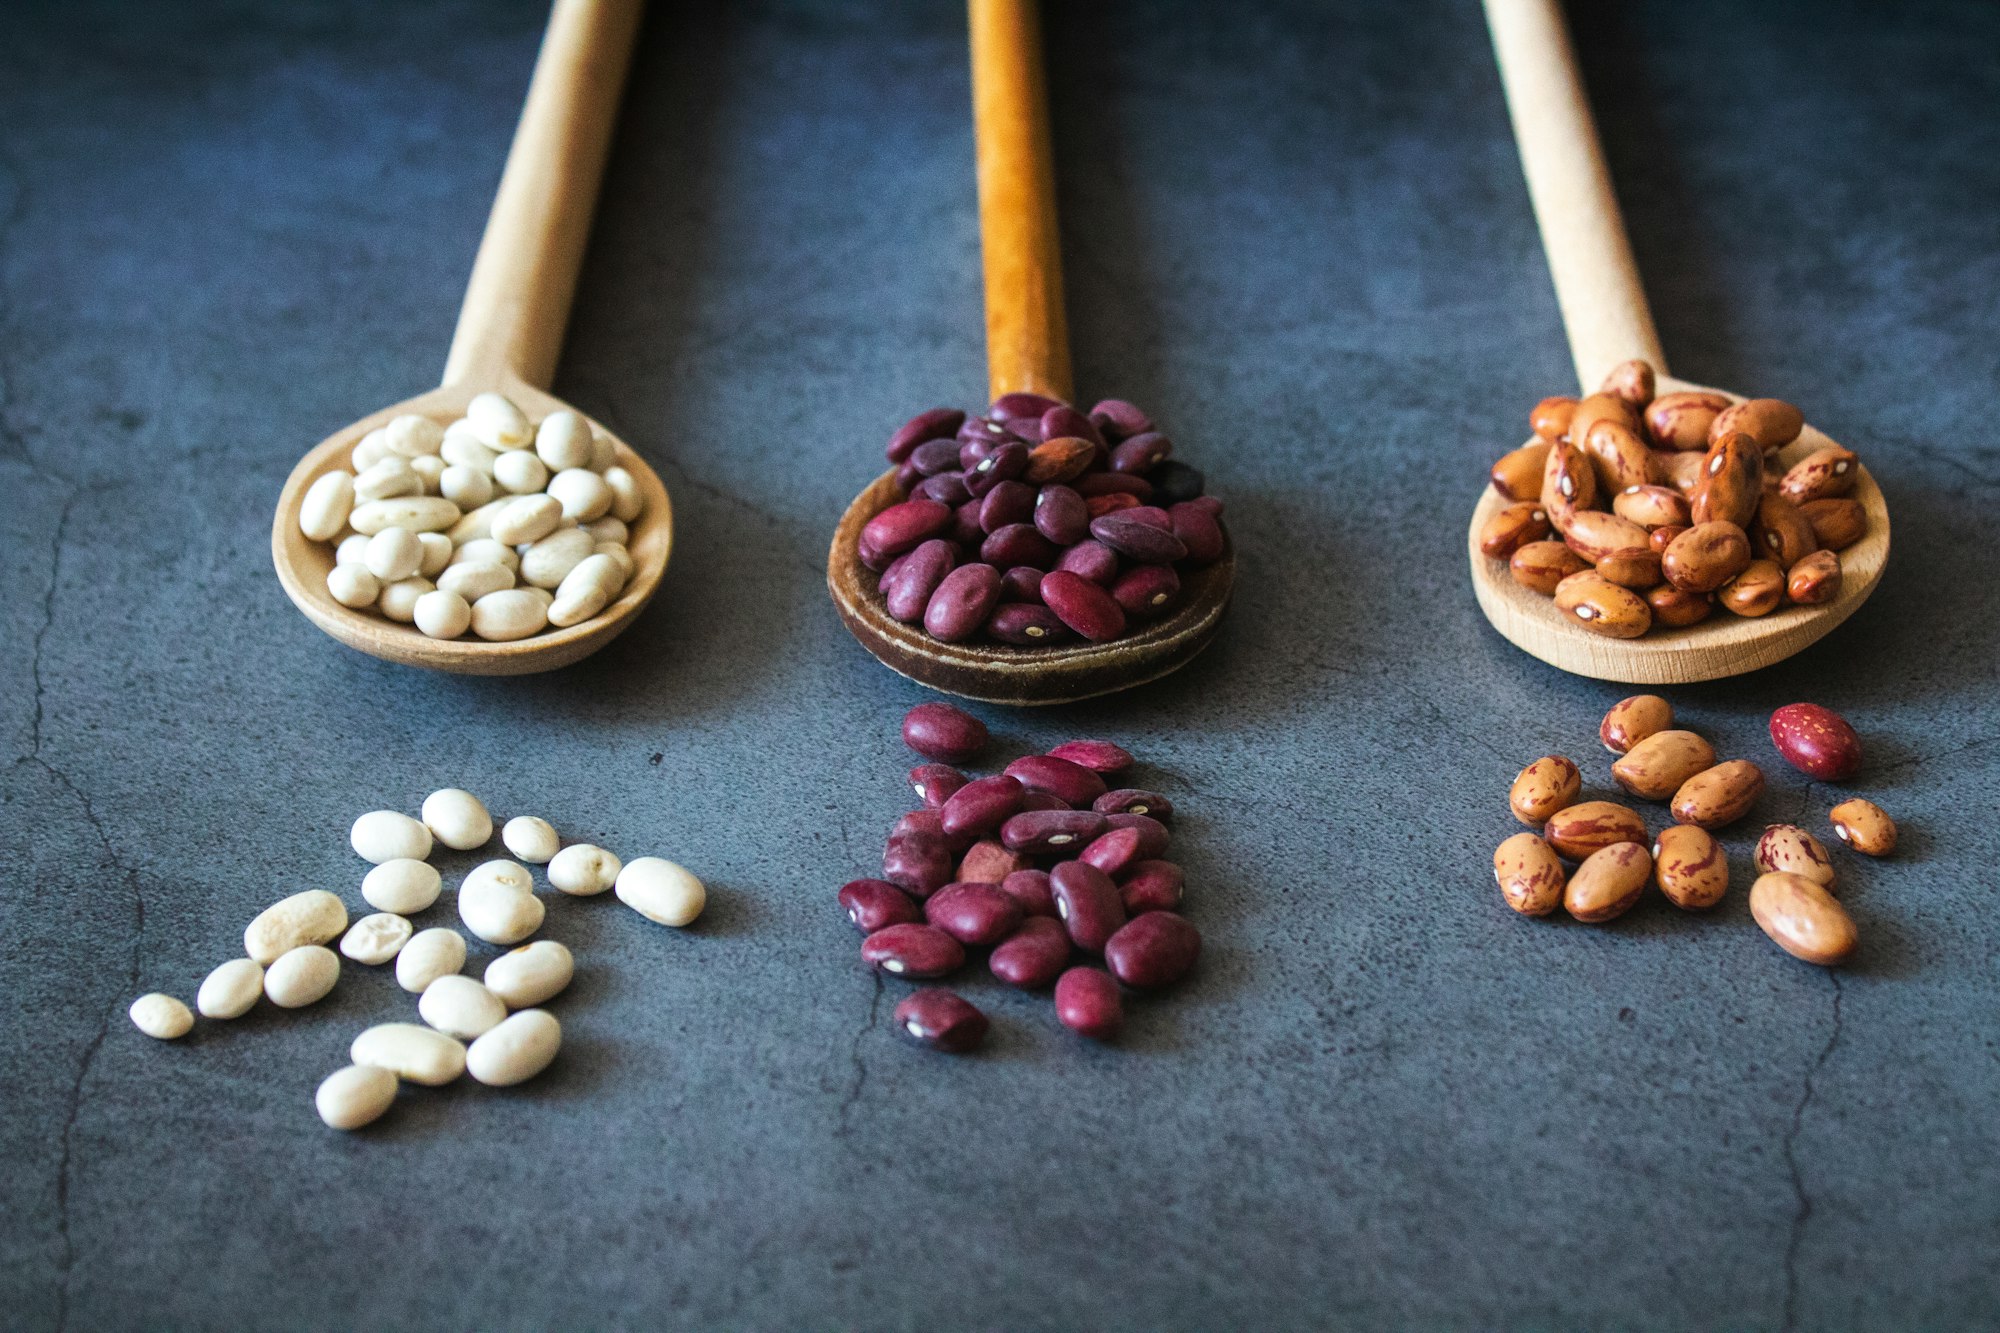 Different kinds of beans on dark background